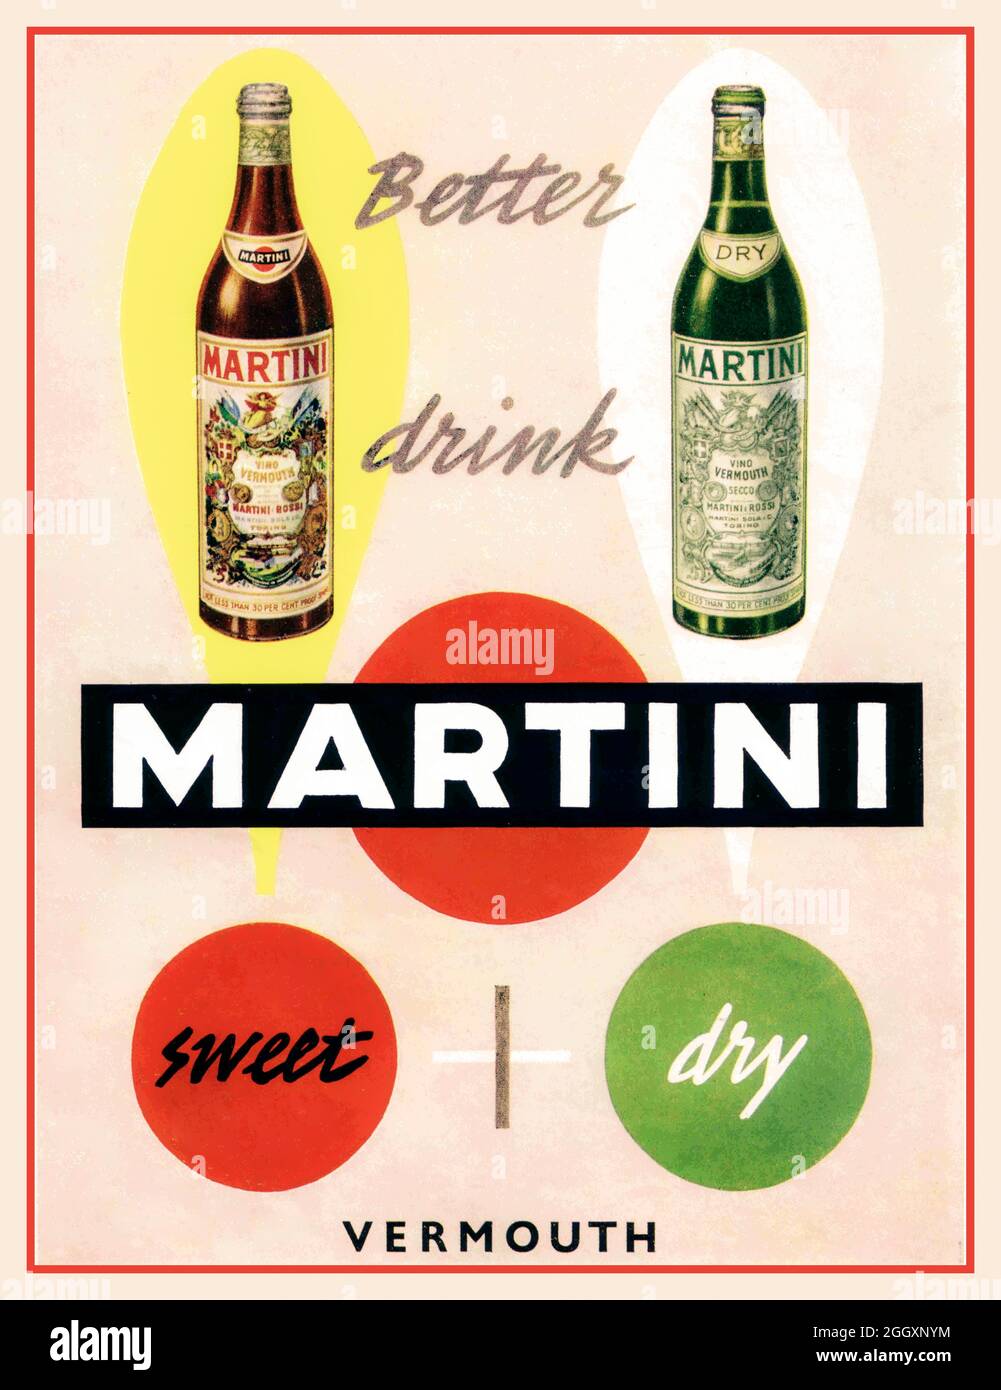 Vintage 1950s Martini Vermouth Drinks Alcohol Advertisement Advertising Poster 'Better Drink Martini' 1950s Two bottles of Martini Vermouth fortified wine, one sweet, one extra dry. Stock Photo